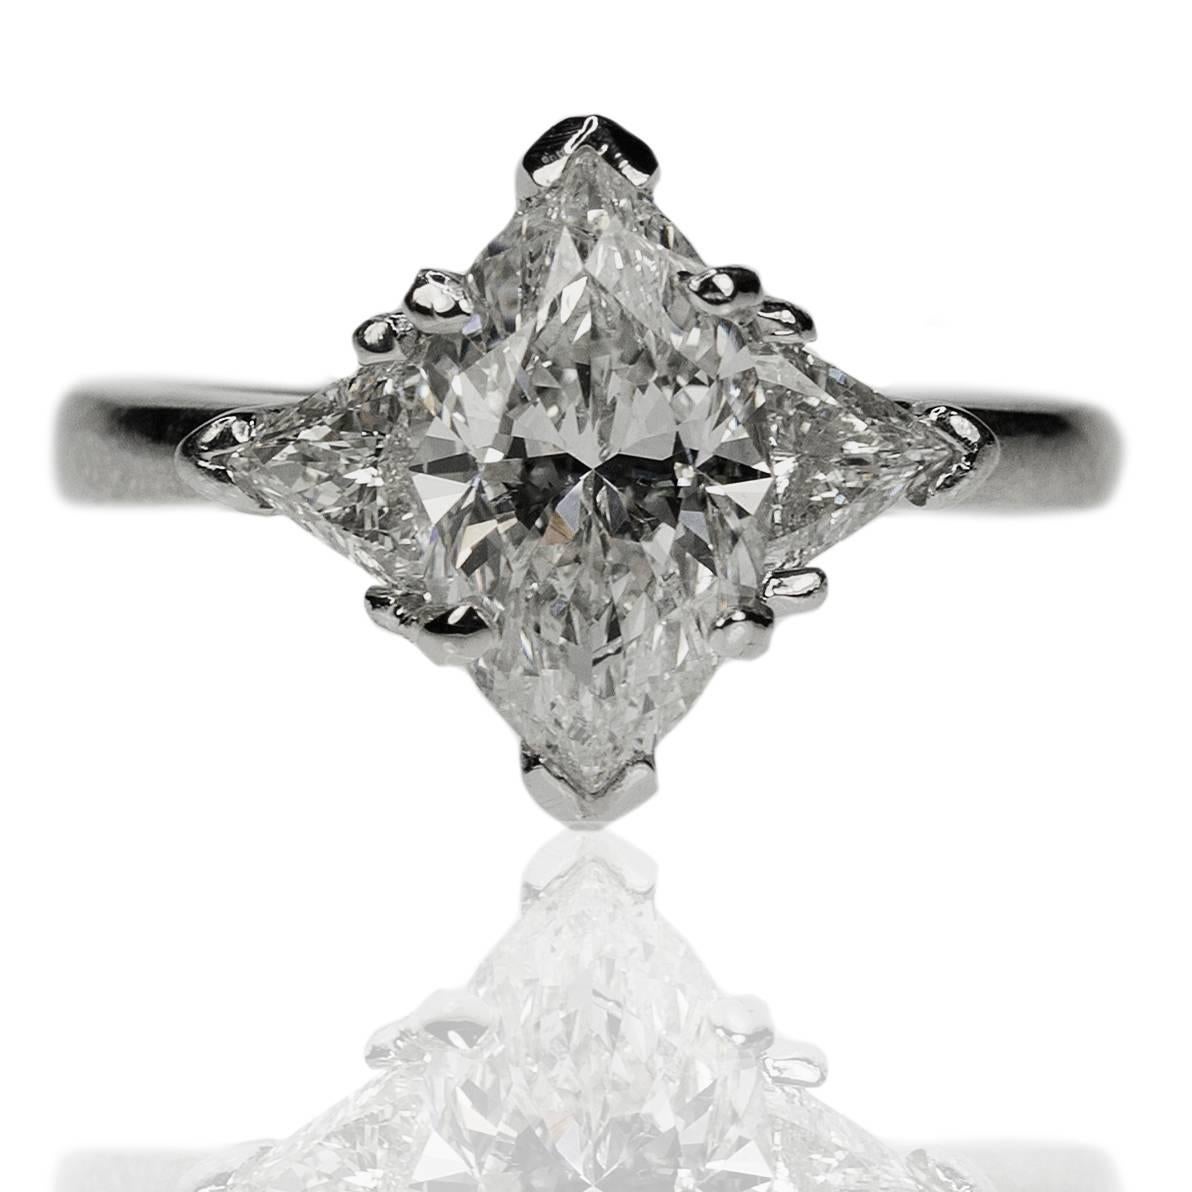 Platinum ring with 2.04 carat marquis cut diamond and two trillion cut diamonds weighing approximately 0.60 carats.